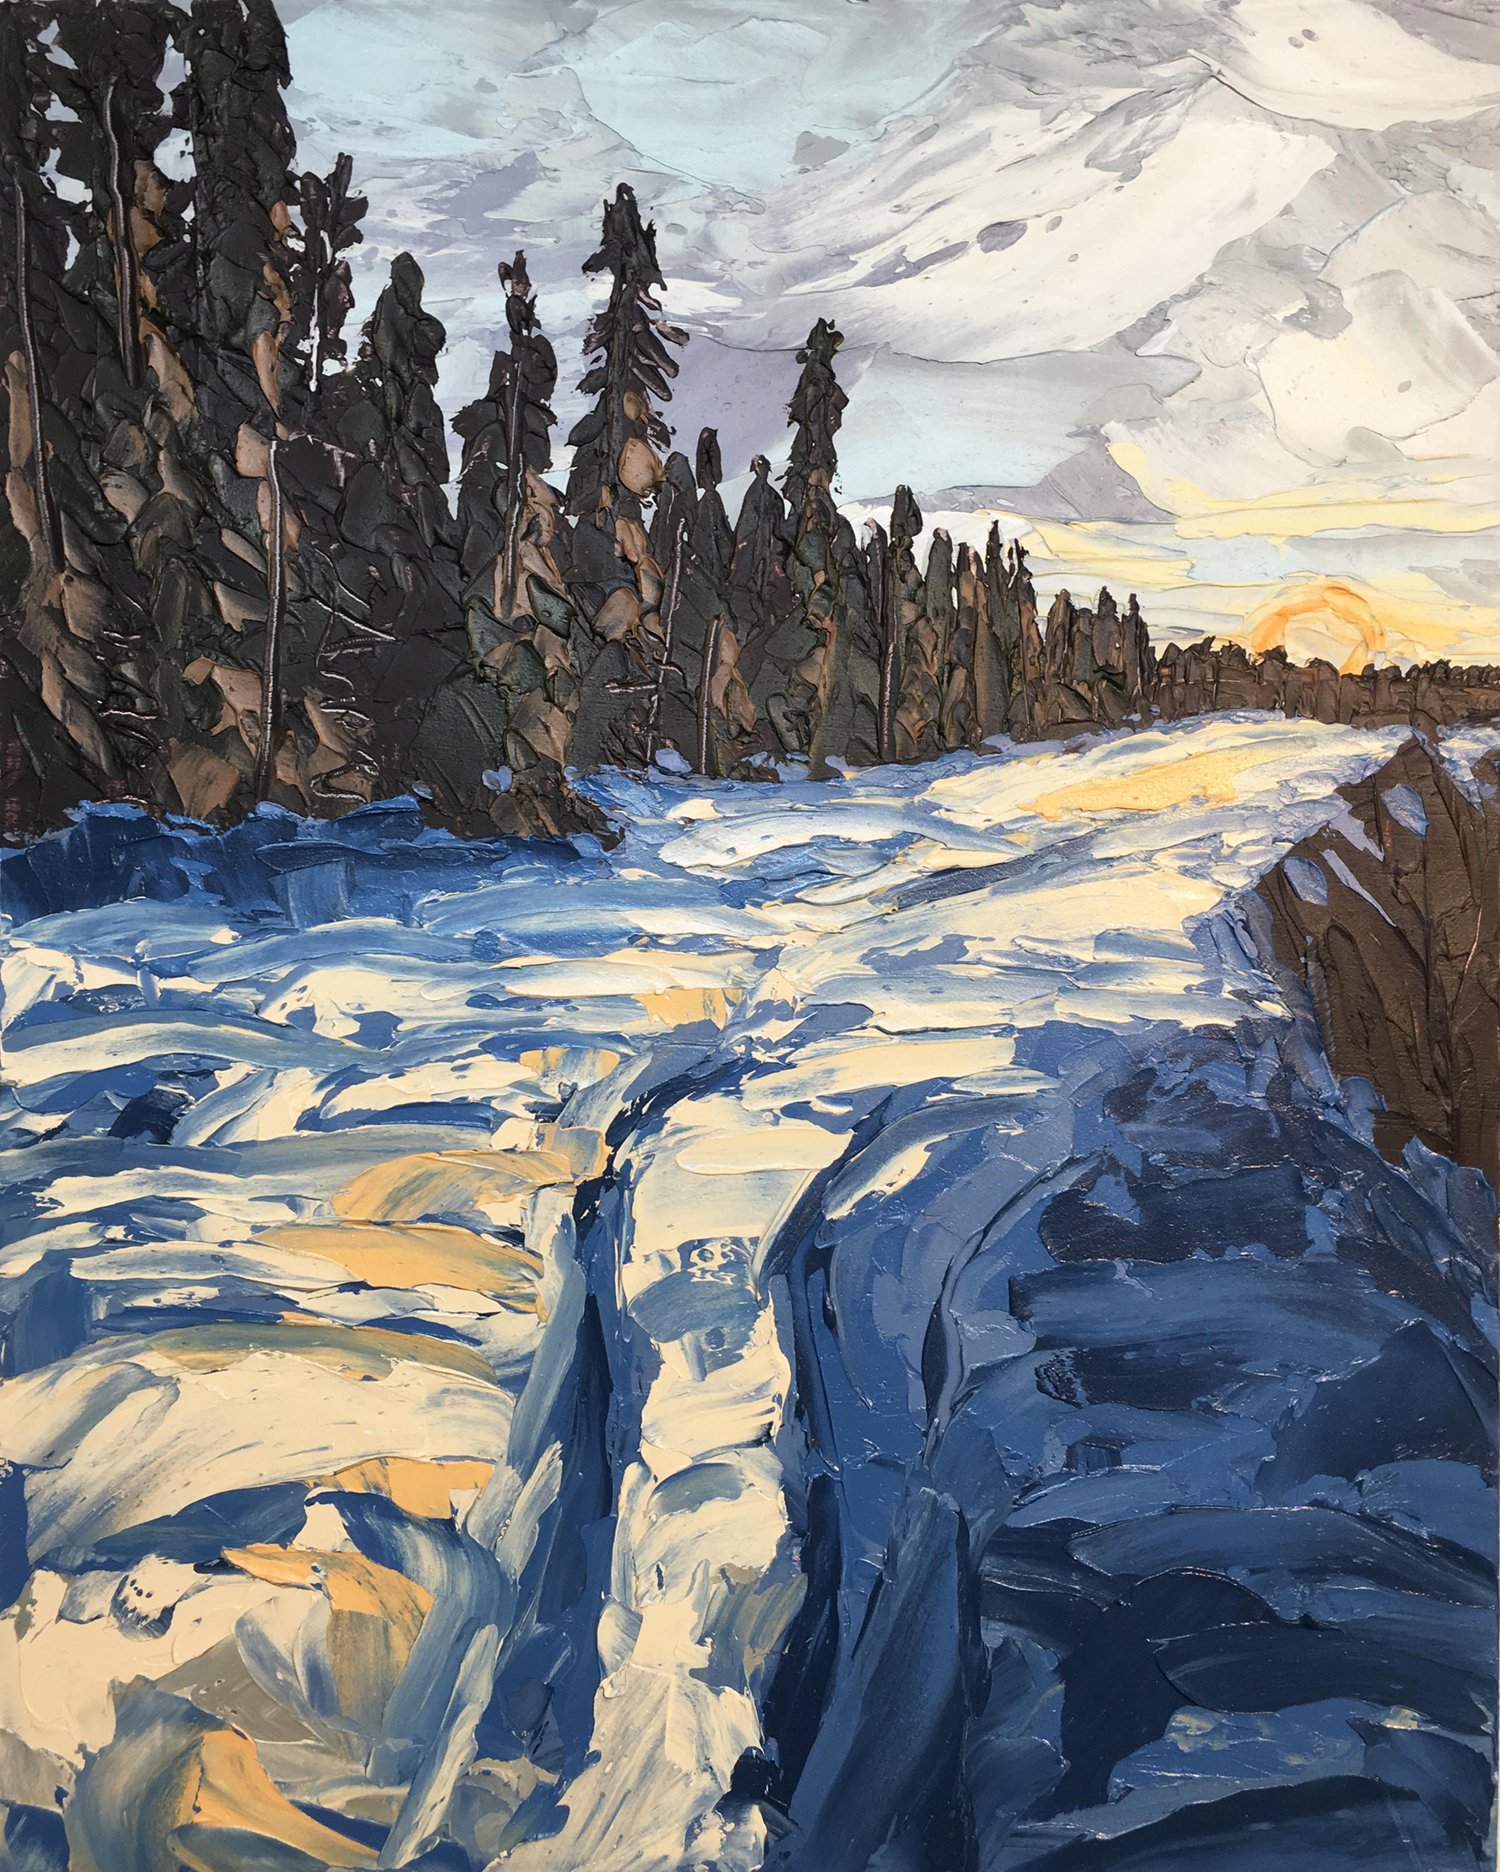 A painting of a snowy path through pine trees during golden hour. Image courtesy of Allison Juneau